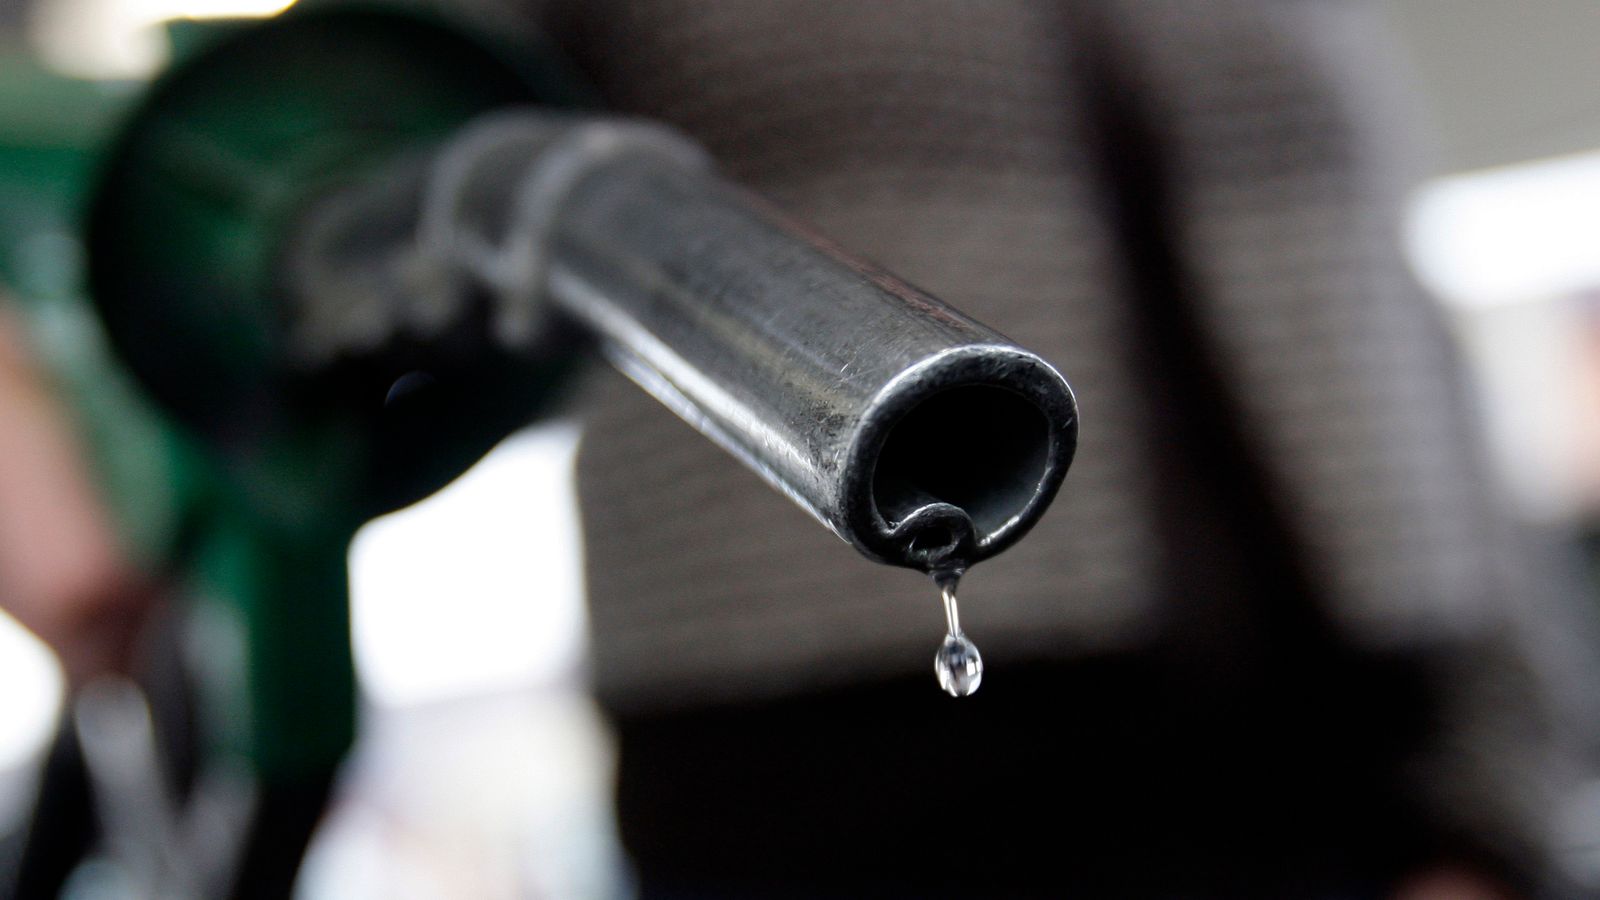 Petrol prices 'likely' to rise further as cost of oil jumps